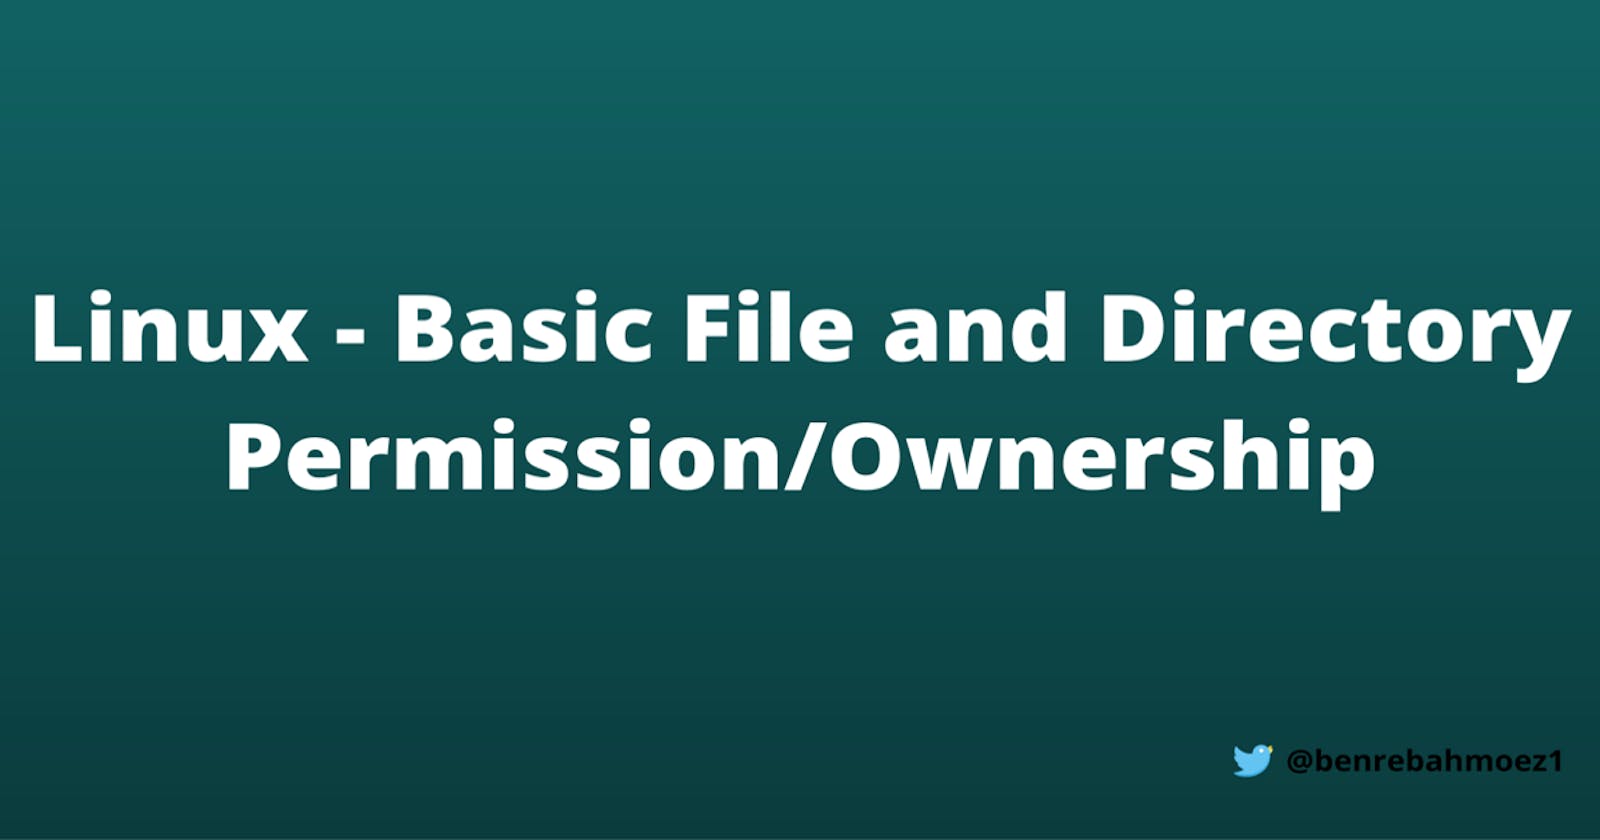 Linux - Basic File and Directory Permission/Ownership